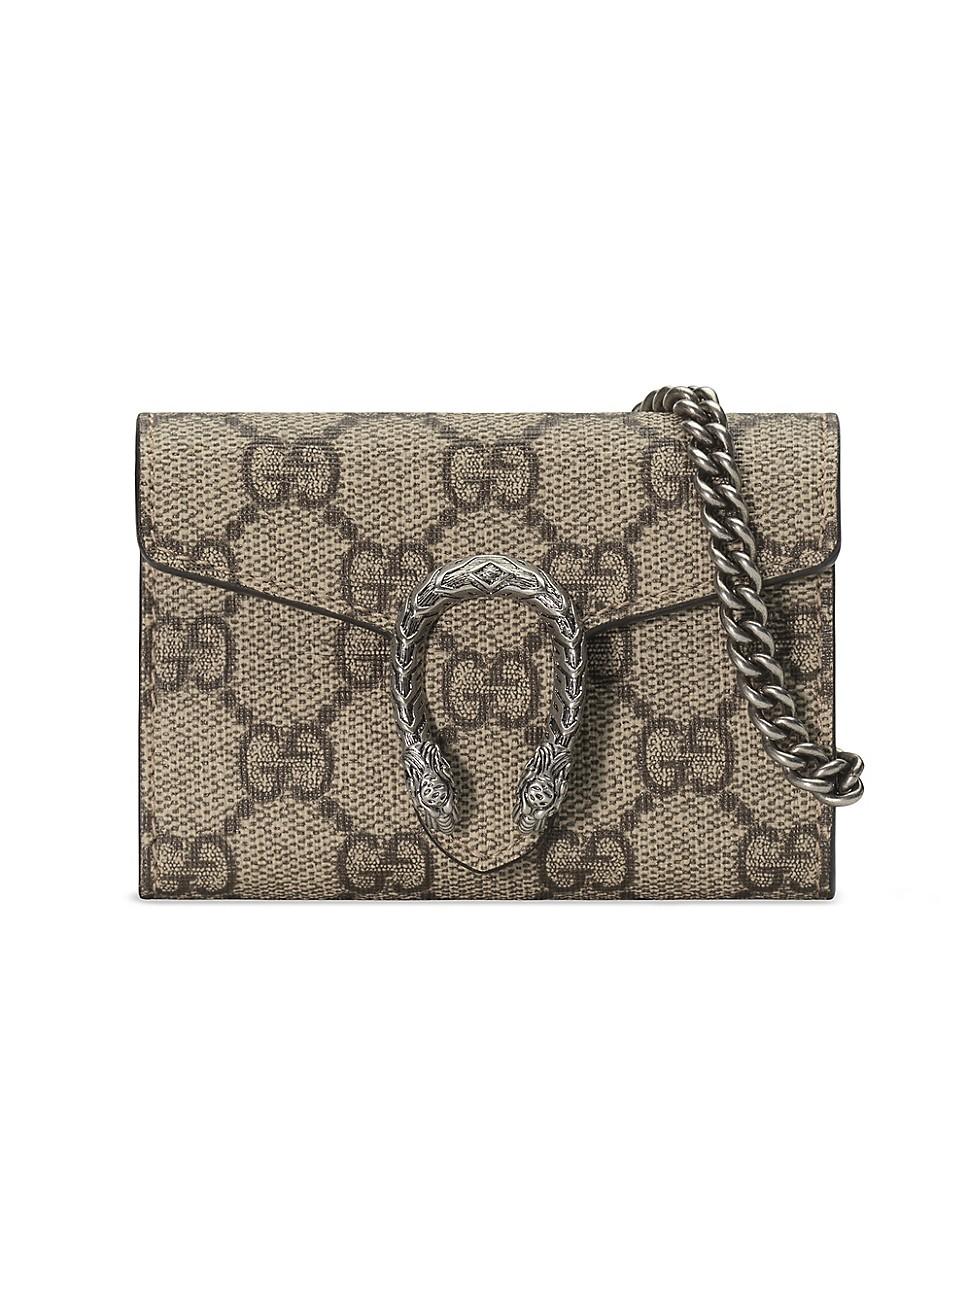 Gucci Canvas Dionysus gg Supreme Chain Wallet in Beige (Natural) - Save 69%  - Lyst